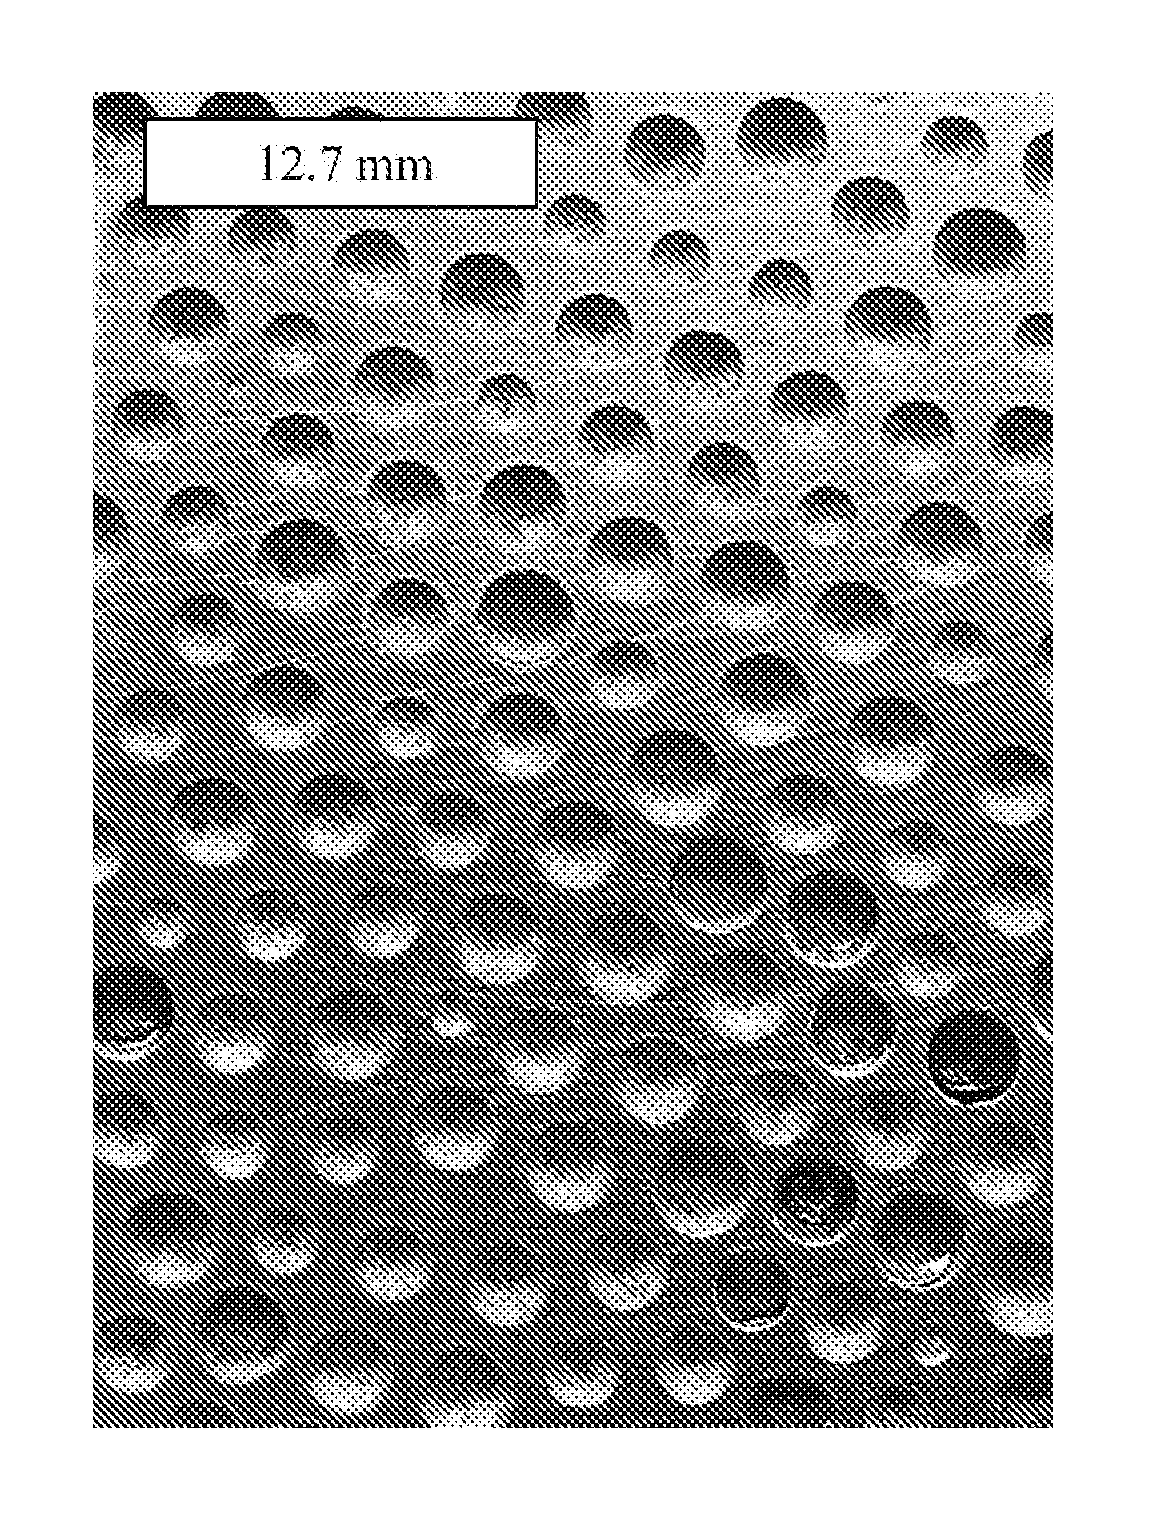 Composite metal foam and methods of preparation thereof